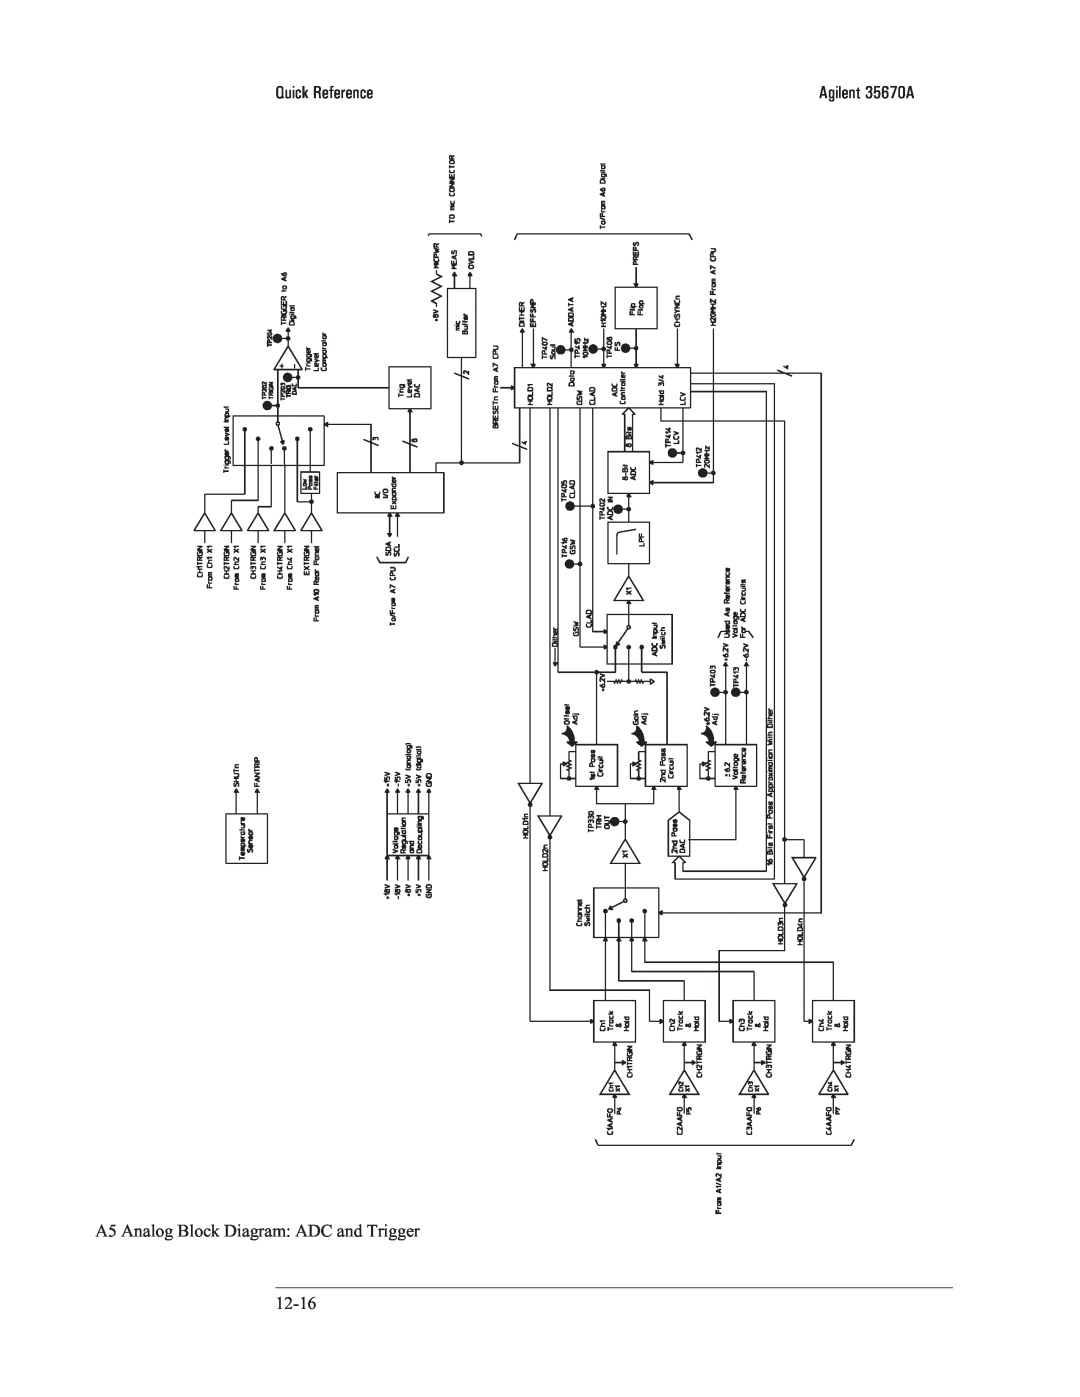 Agilent Technologies 35670-90066 manual Quick Reference, A5 Analog Block Diagram: ADC and Trigger, Agilent 35670A 